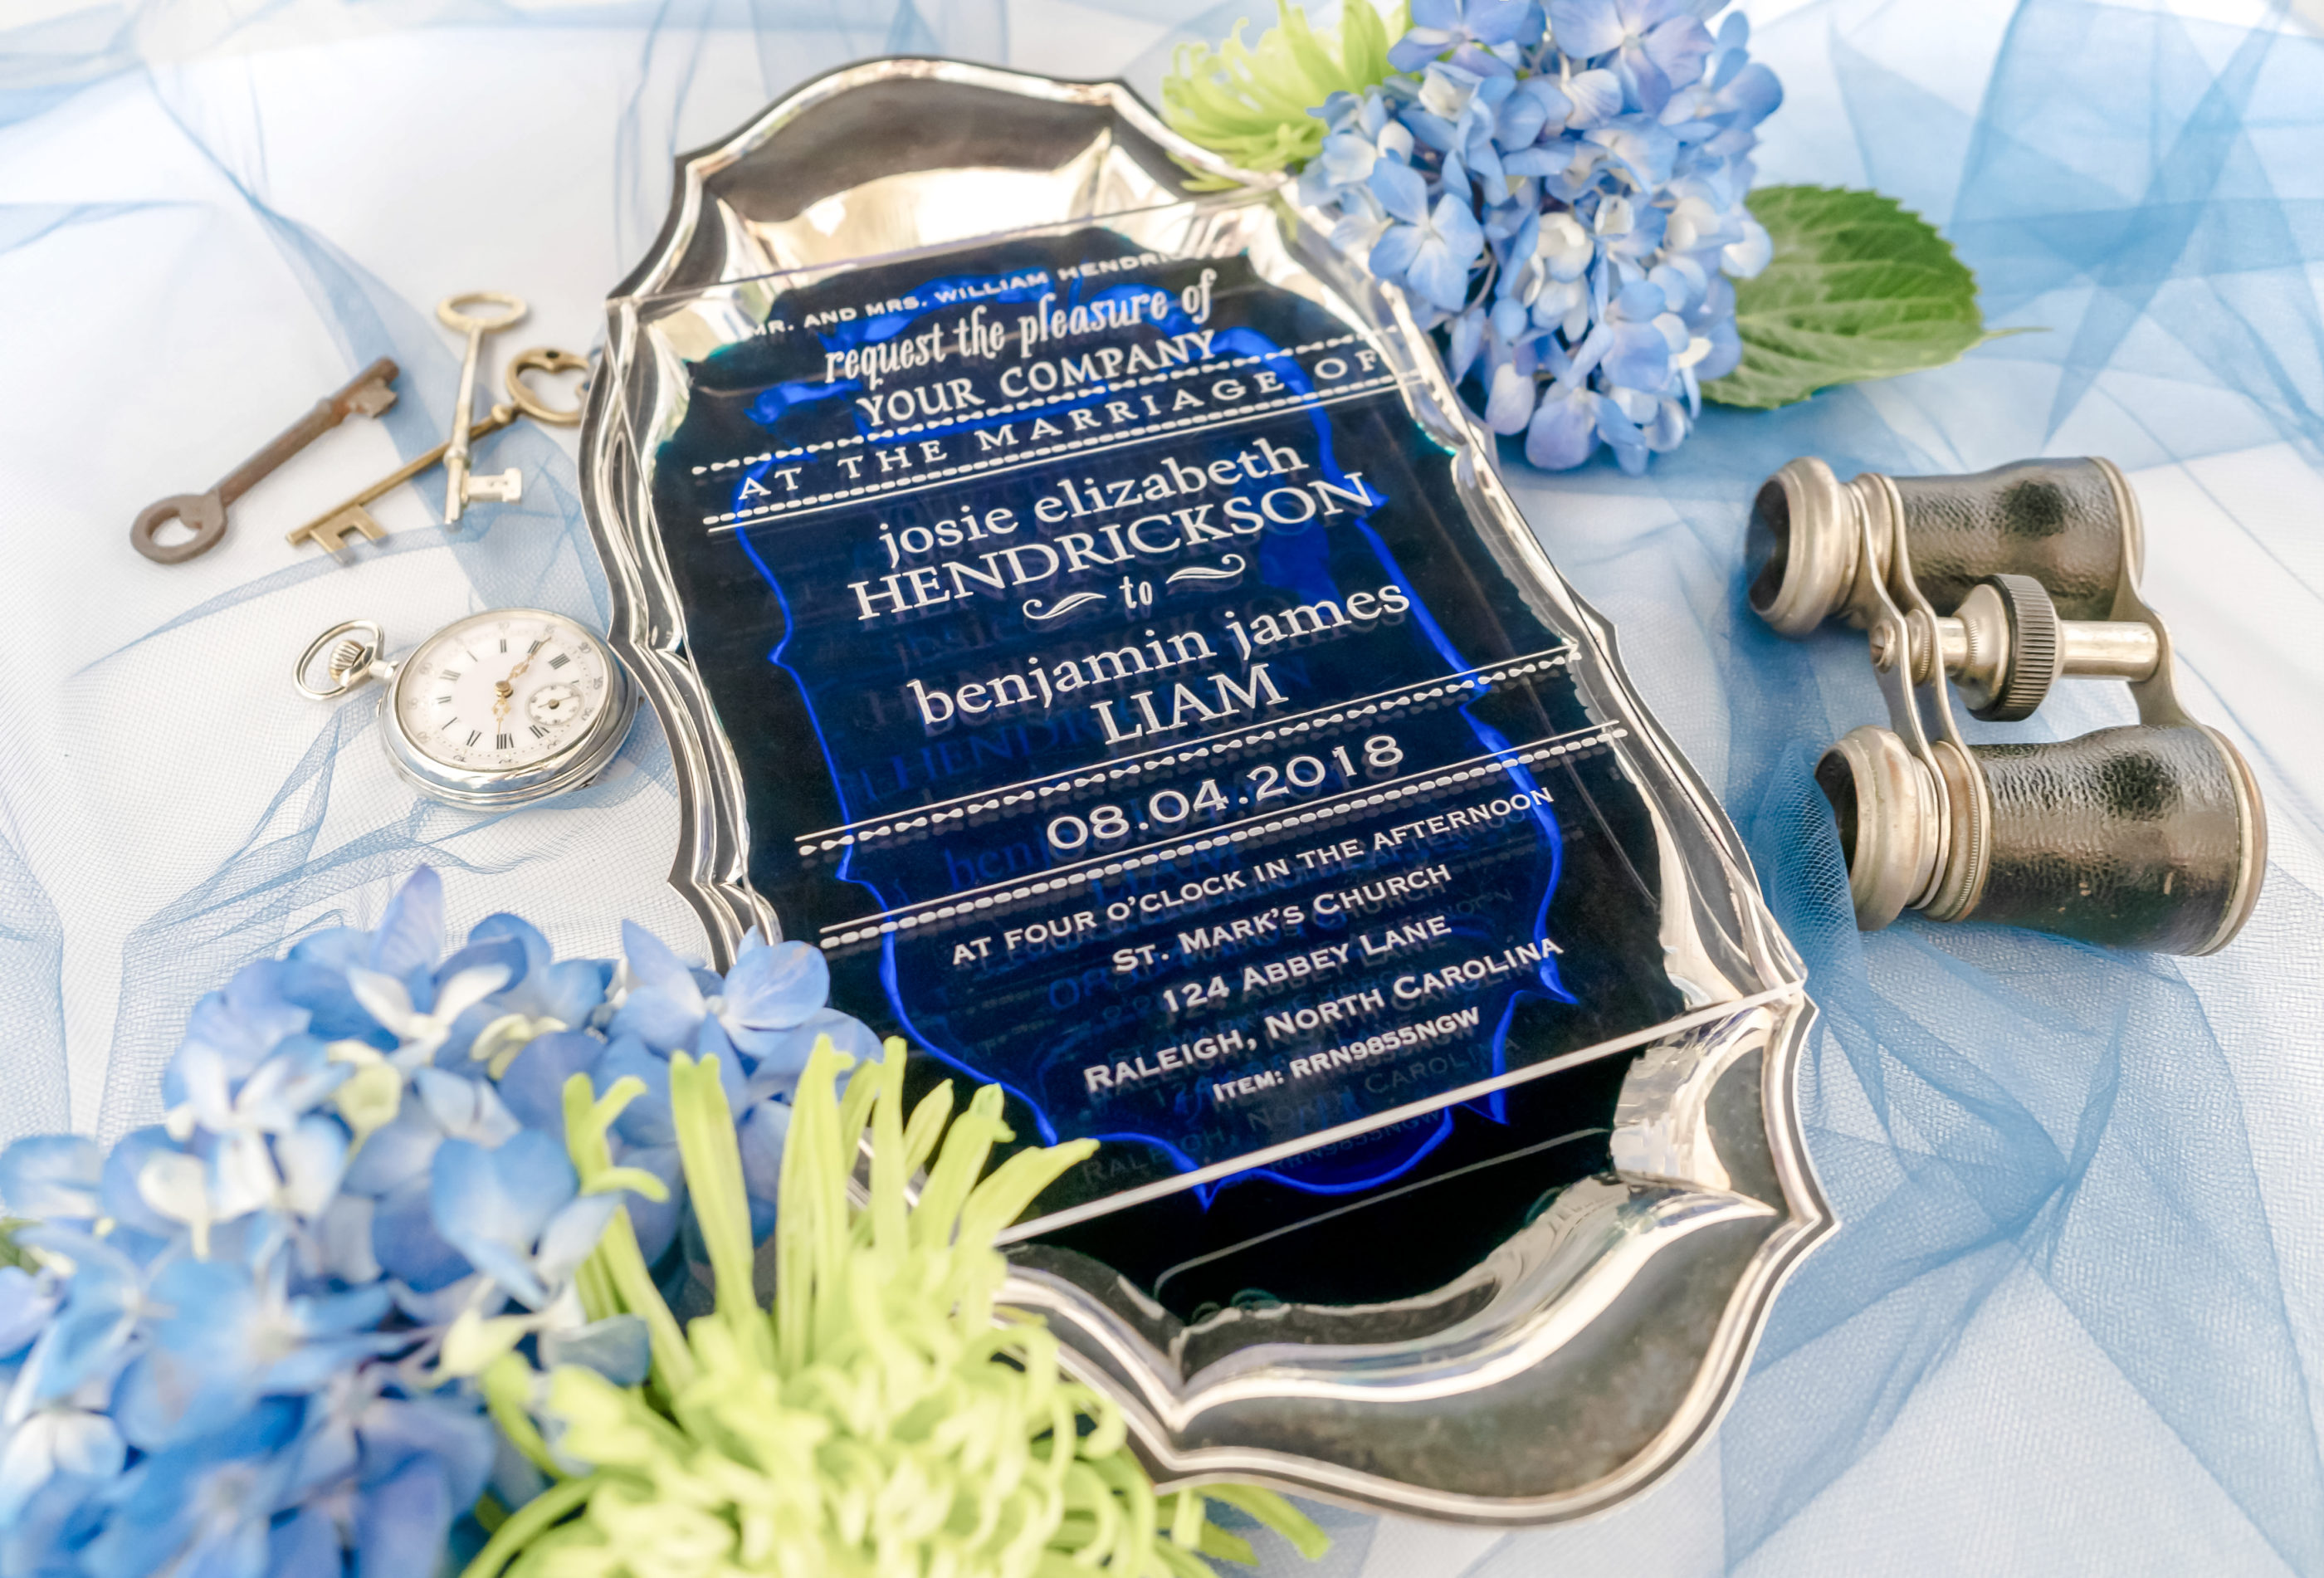 close photograph of clear acrylic invitation with white writing photographed on dark blue background